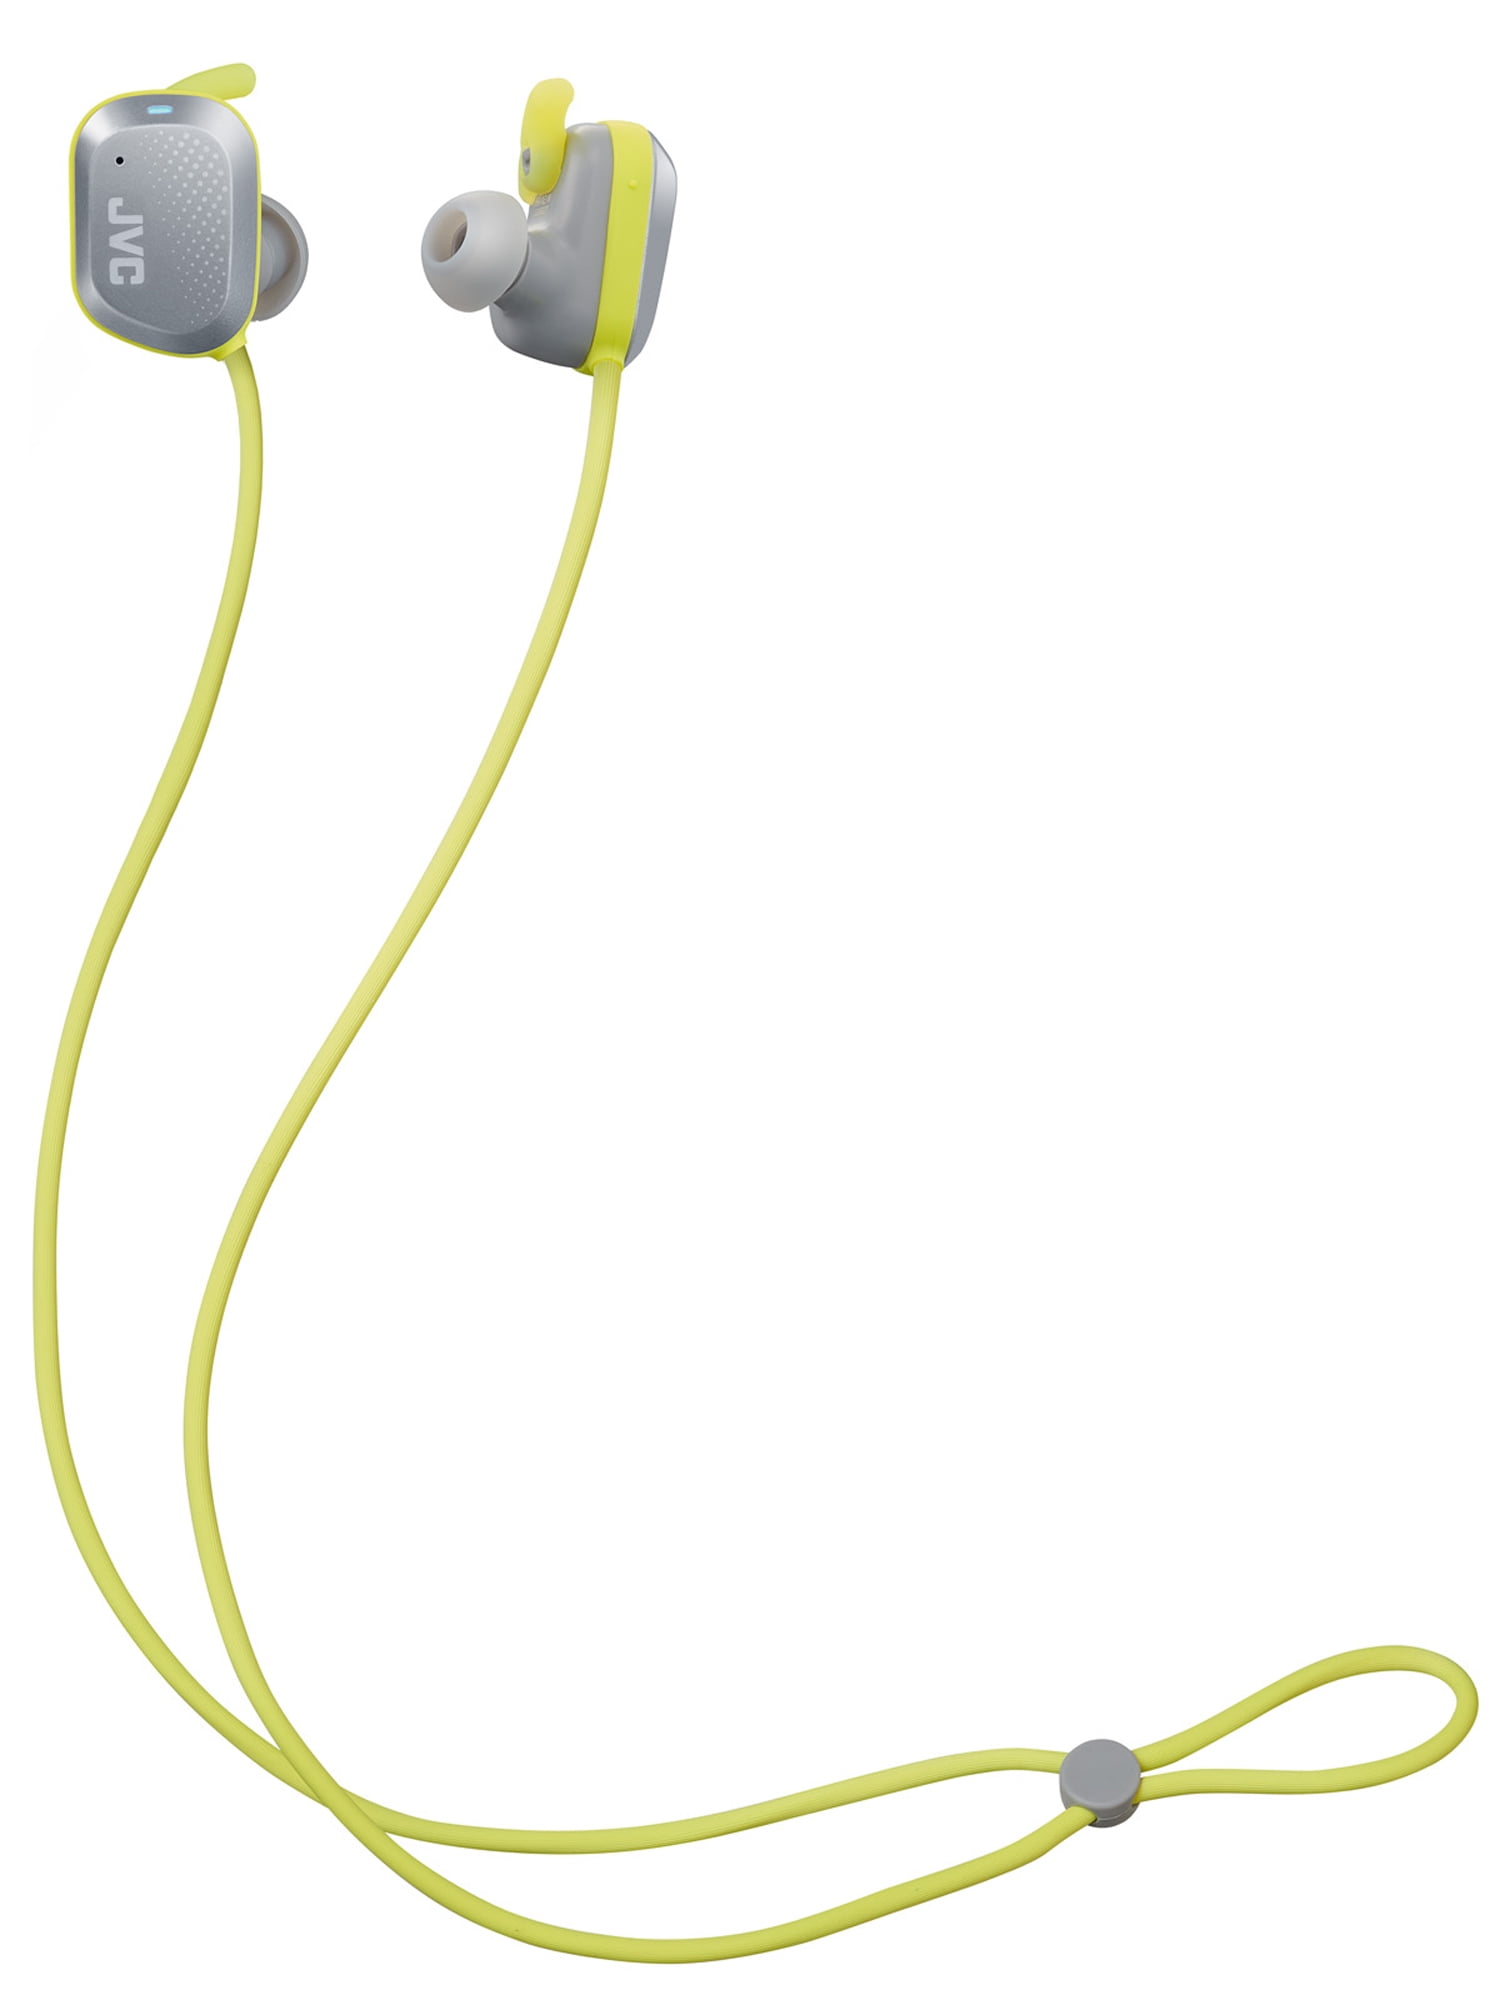 JVC HA-AE1W AE Sport Wireless Earbuds - in Bluetooth Headphones, 11 Hour Life with Charging Case, Touch & Talk, Touch Sensor Control, IP55 (Grey/Yellow) - Walmart.com